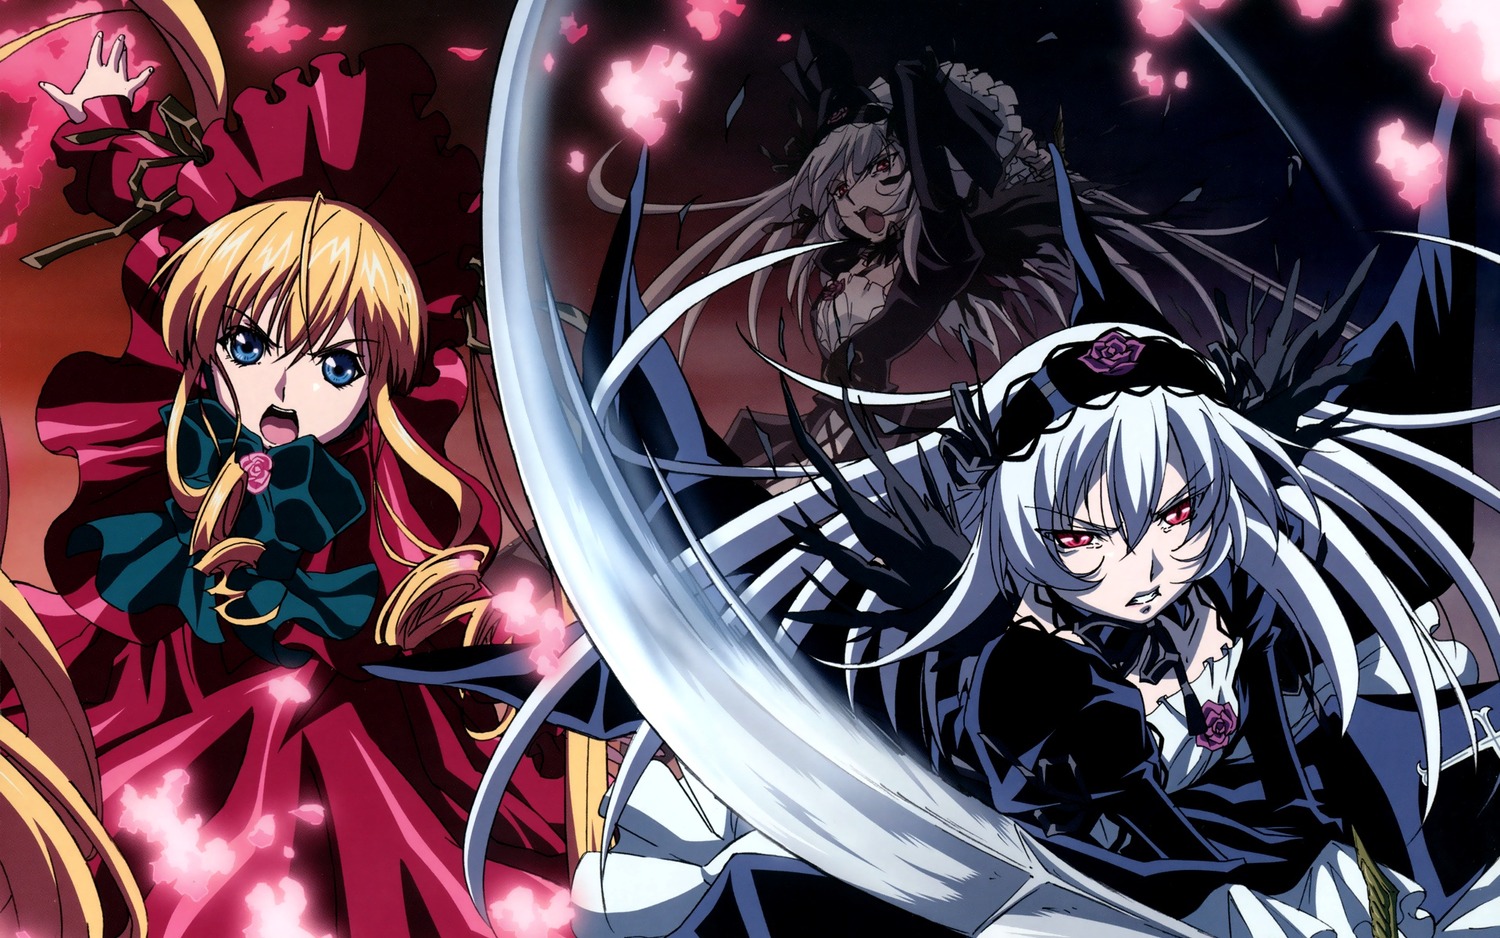 2girls 3girls artist_request blonde_hair blue_eyes bow cropped dress flower frills gothic_lolita hairband highres image lolita_fashion long_hair long_sleeves multiple_girls official_art official_wallpaper open_mouth pair petals red_dress red_eyes rozen_maiden shinku silver_hair suigintou sword twintails weapon wings